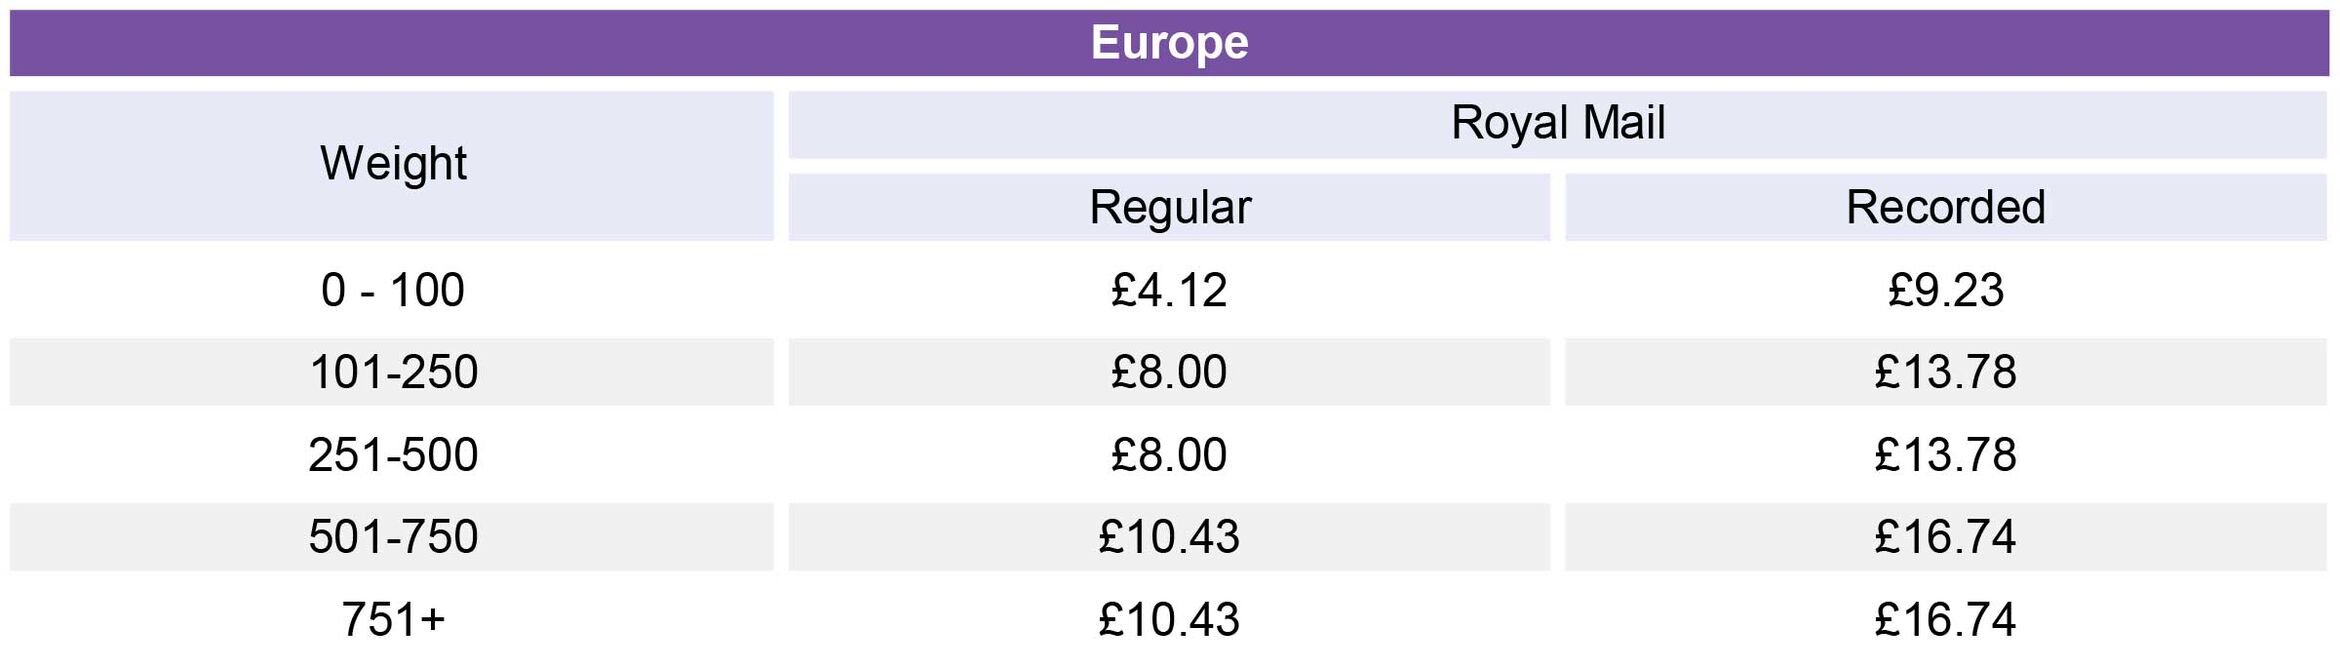 Europe-Shipping-Cost